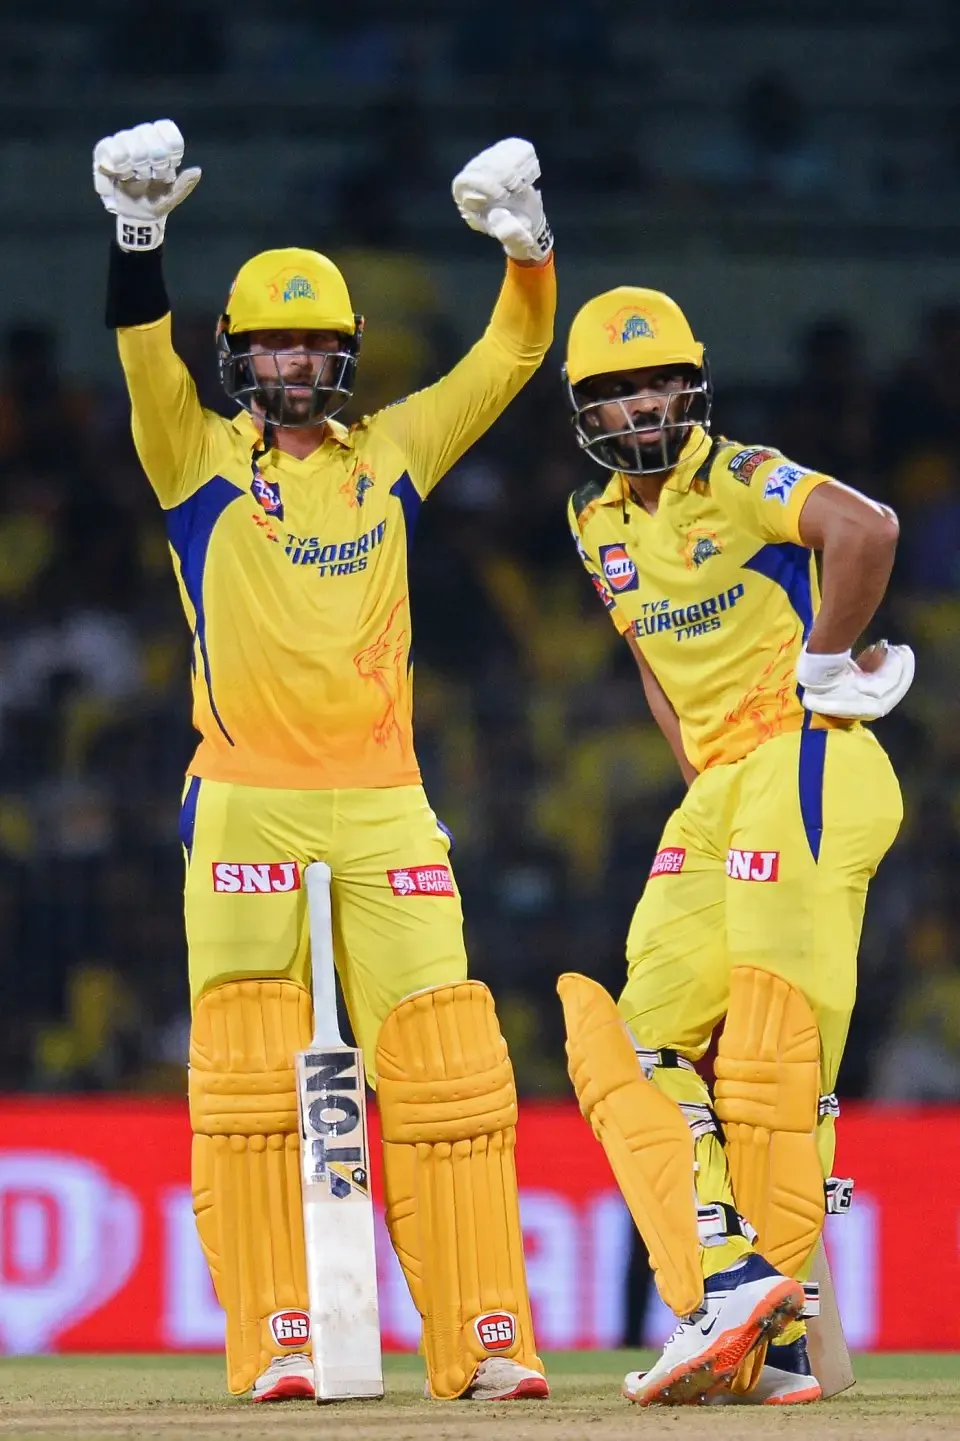 CSK vs SRH: Devon Conway and Ruturaj Gaikwad added 87 for the first wicket | Sportz Point